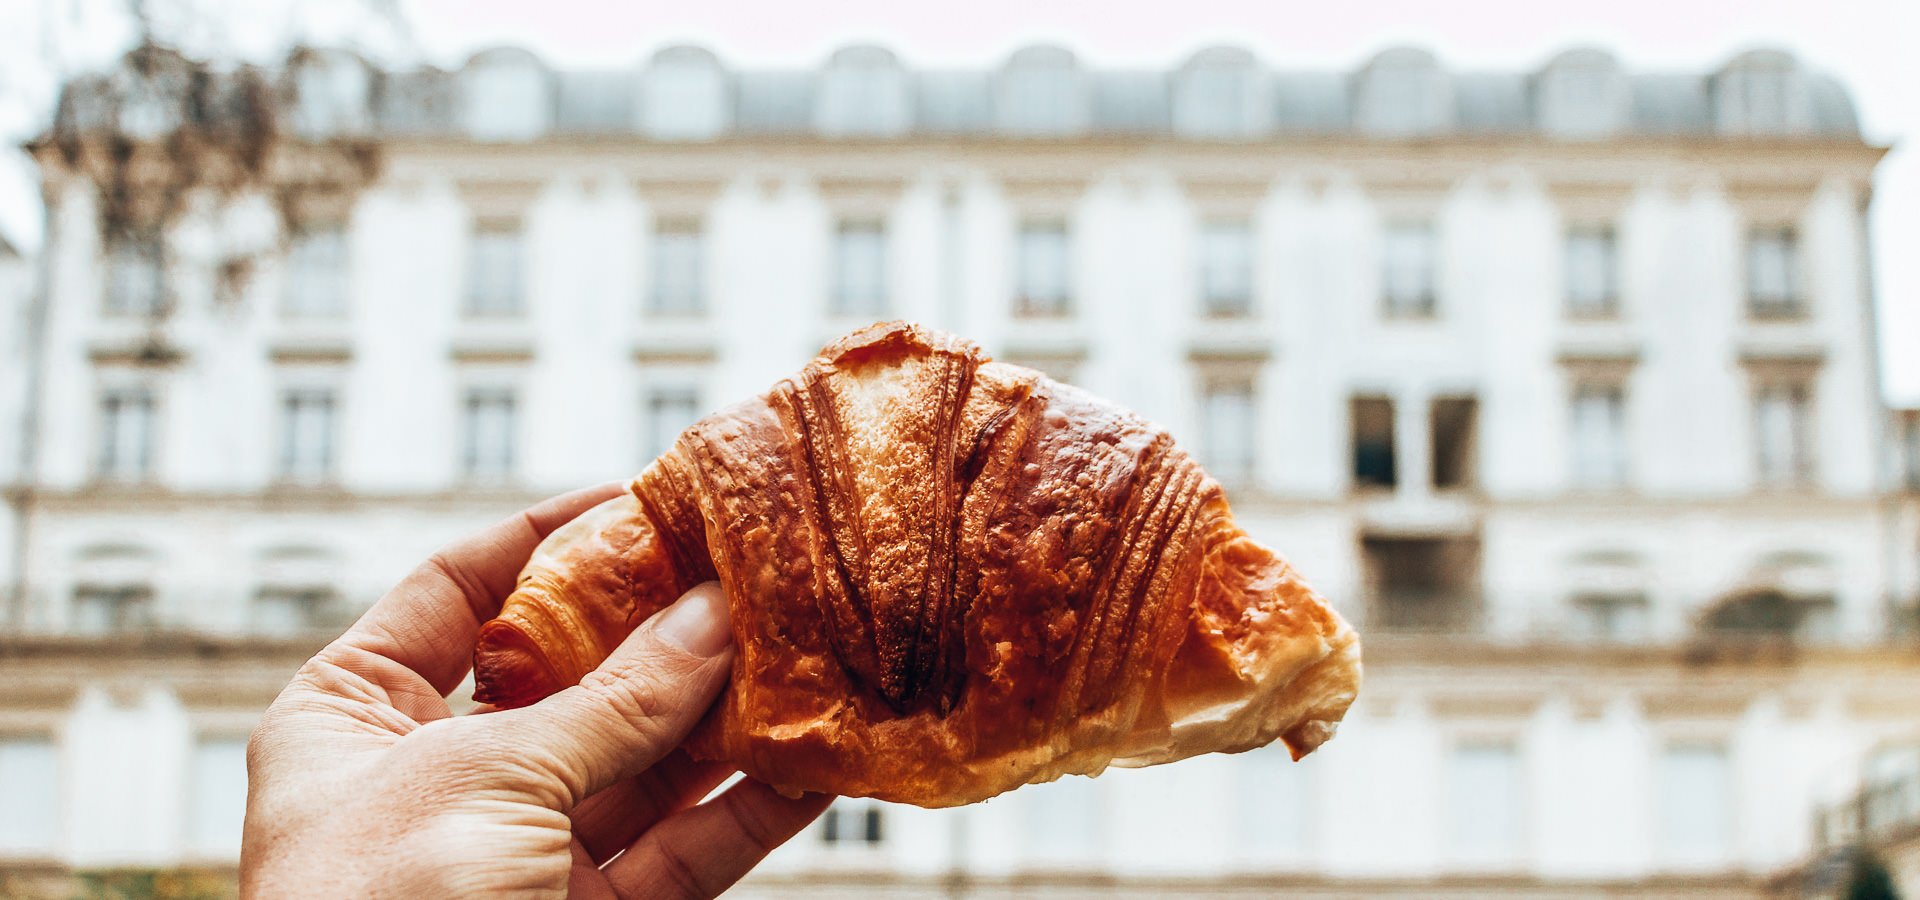 8 Of The Best Bakeries and Pâtisseries In Paris | best bakeries and pâtisseries in paris 2